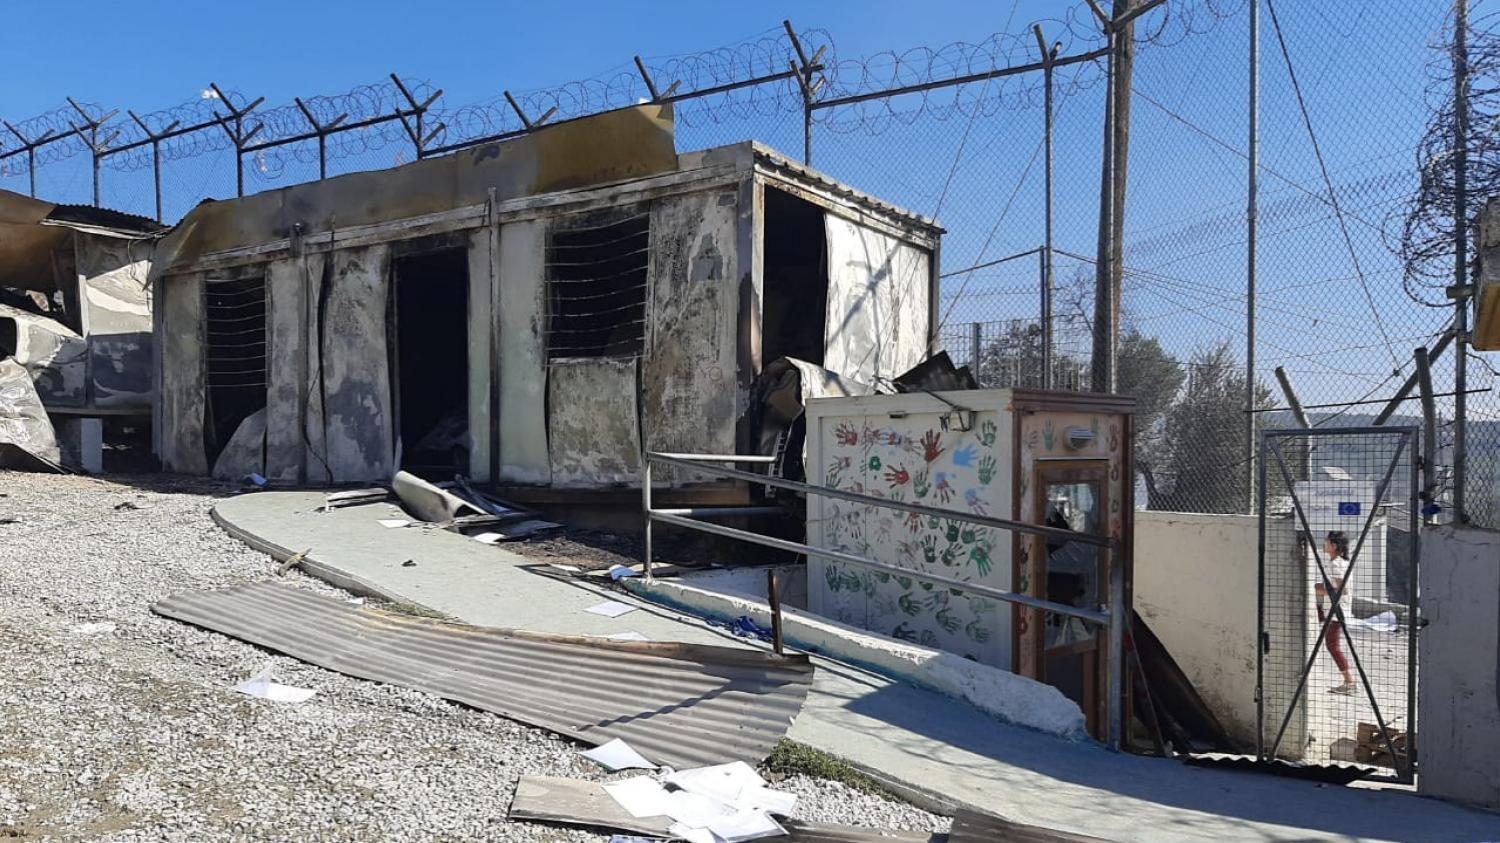 Damage to Moria camp in Lesvos Greece after fire. Photo: IOM Greece